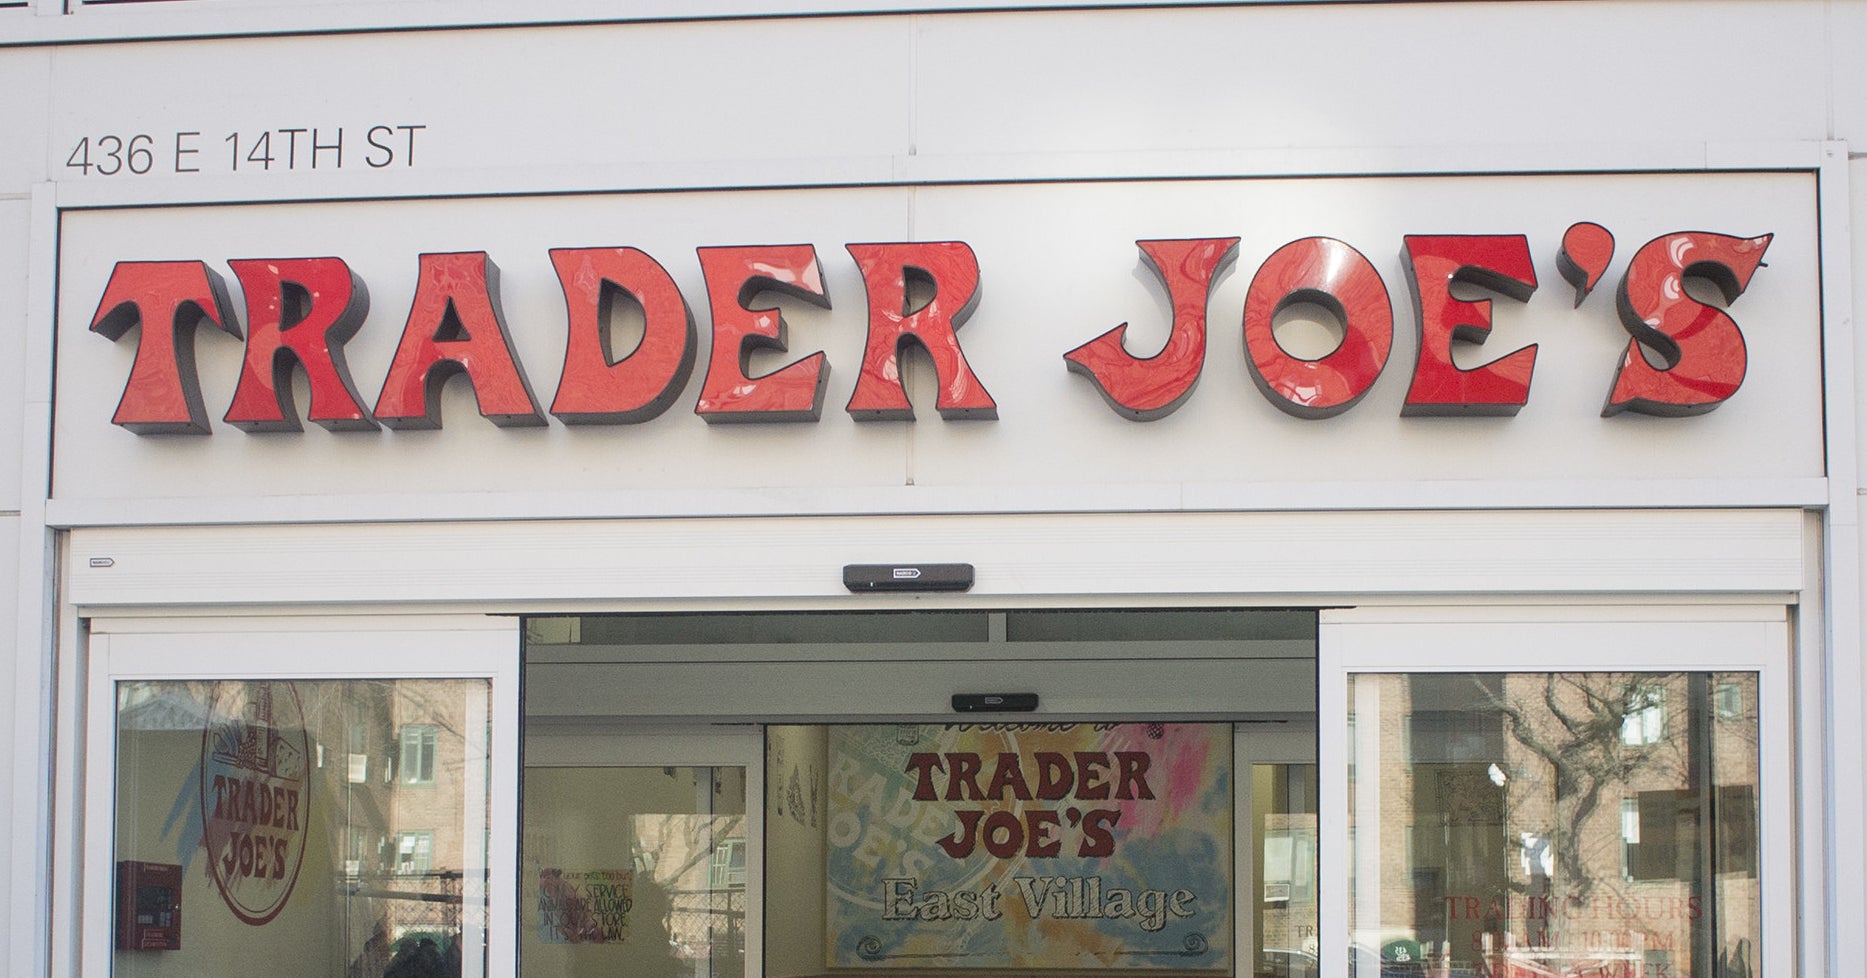 A Trader Joe employee said he was fired for requesting better COVID-19 protections